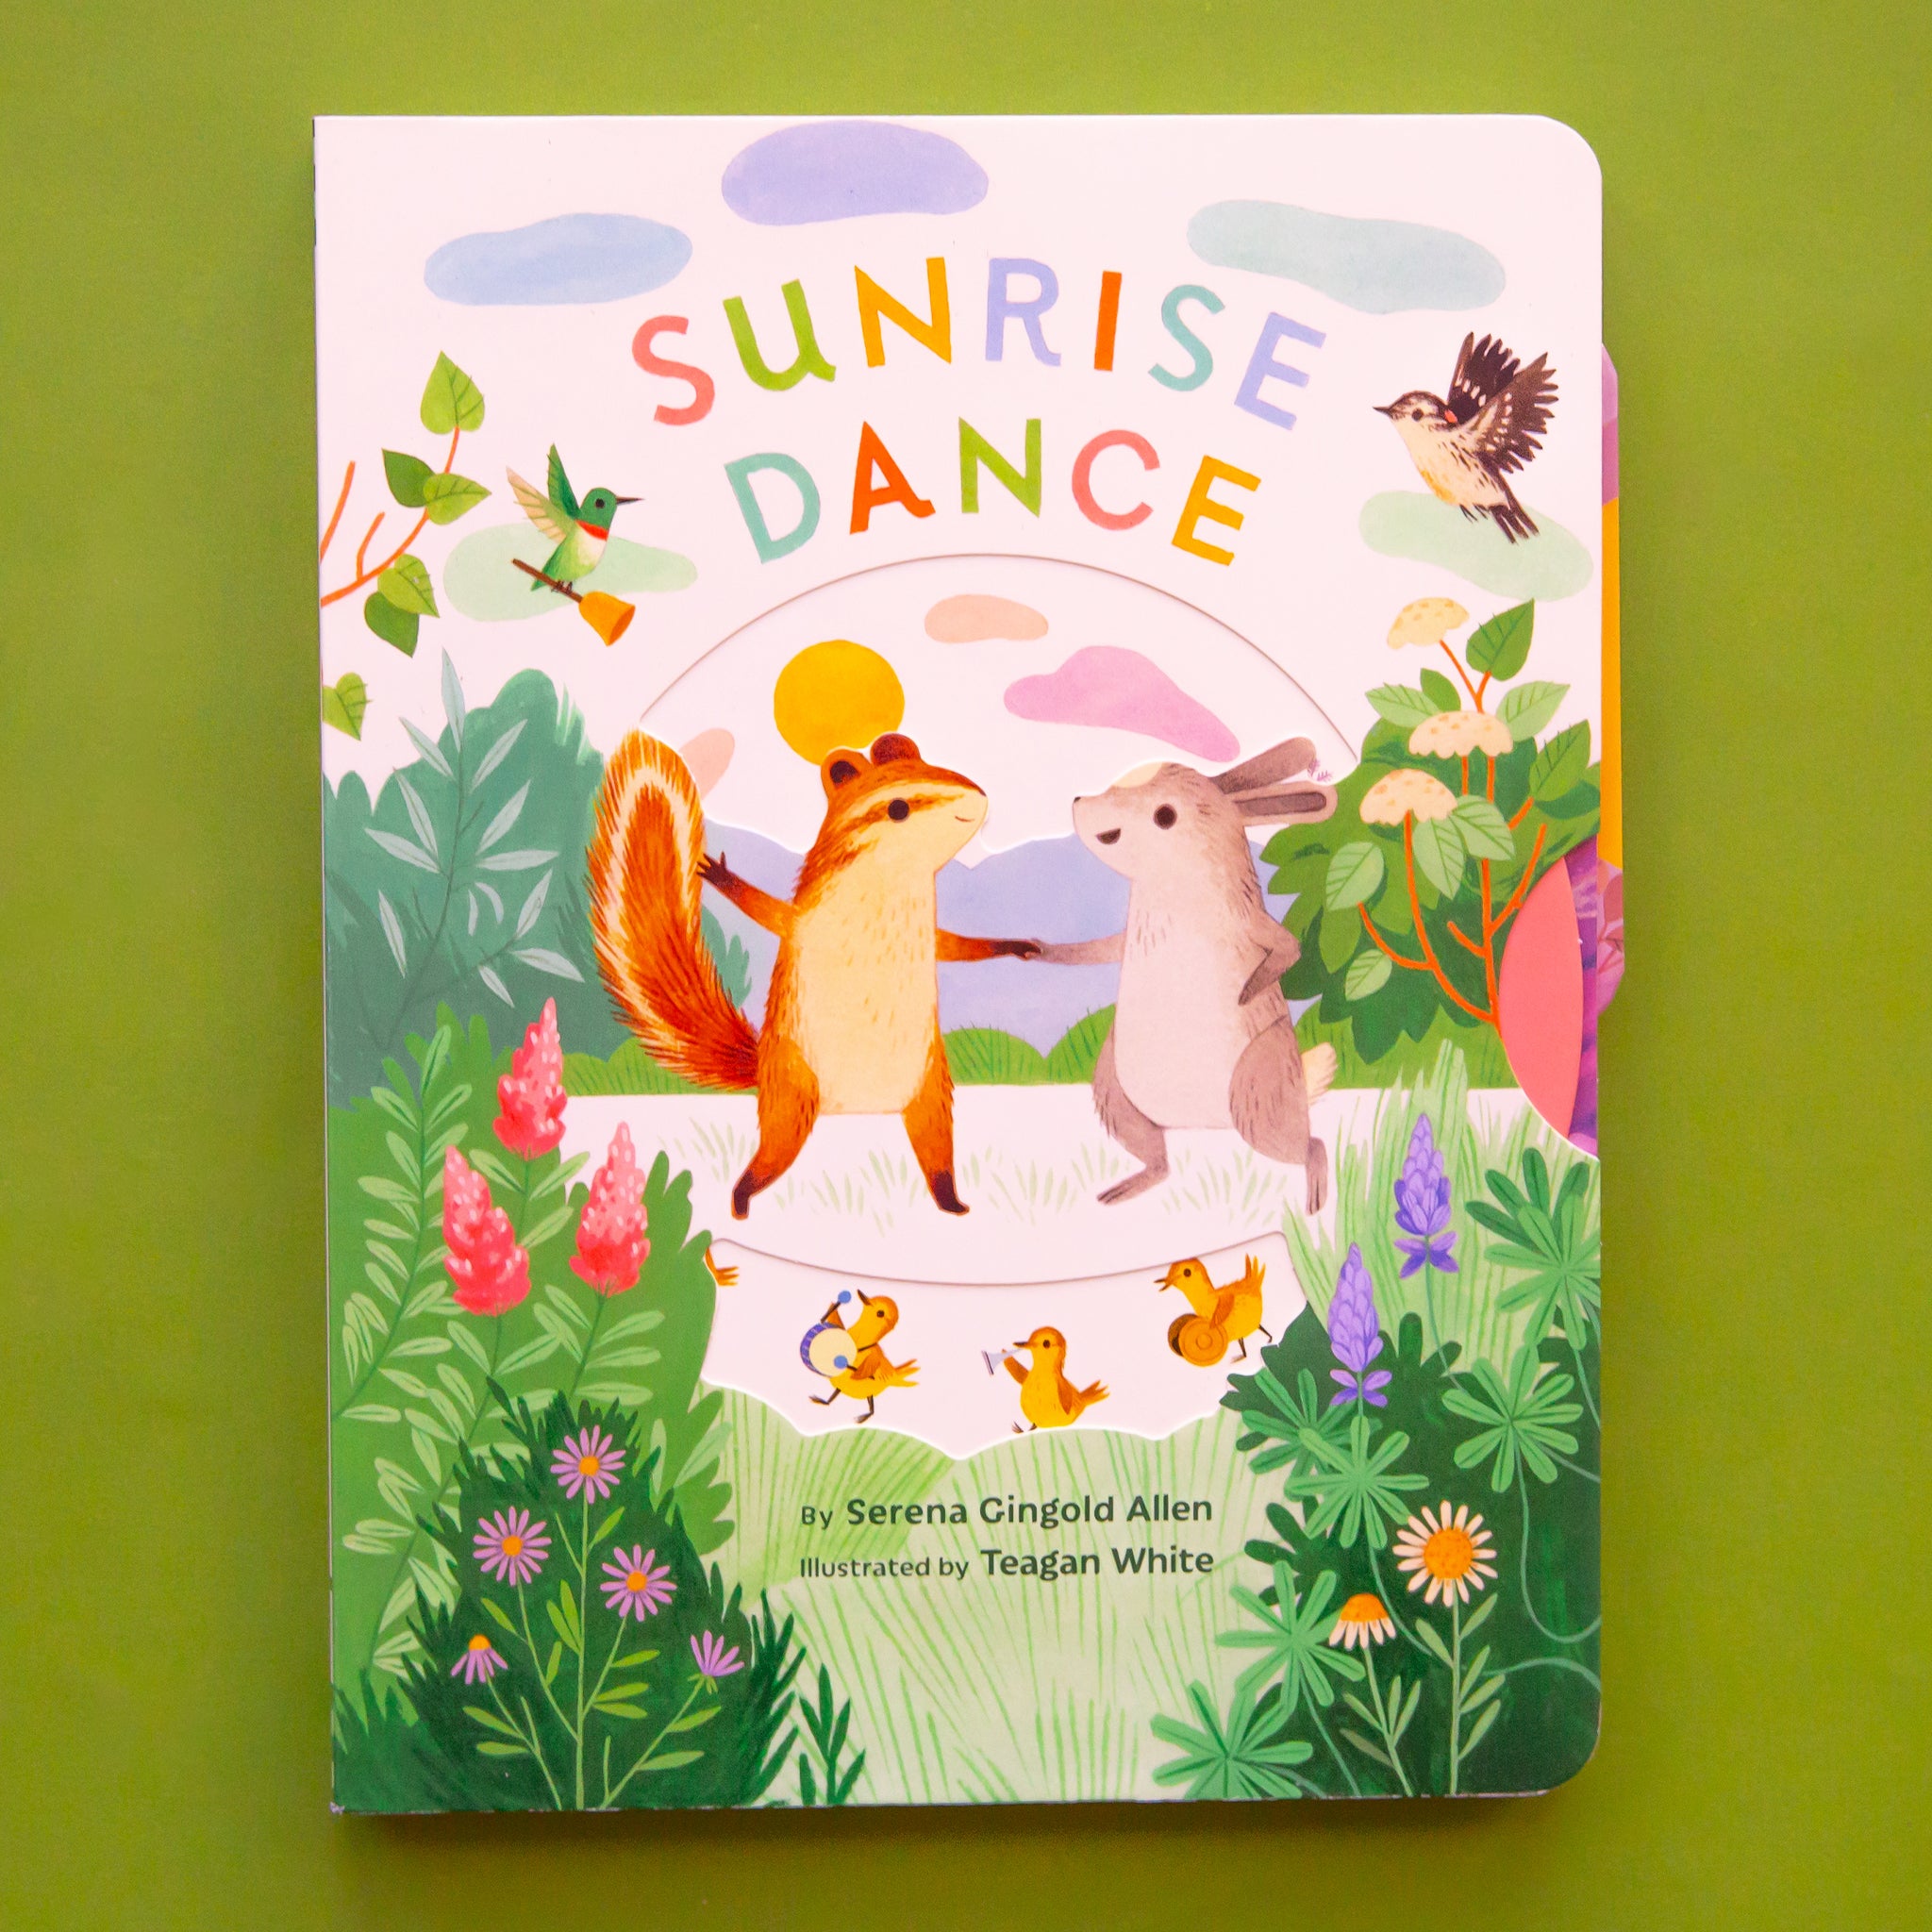 Hardcover children's book titled 'Sunrise Dance' in colorful lettering. Below the title is a spring themed scene of animals dancing in a grass field. Animals include a squirrel and bunny holding hands, instrument playing ducklings and more.